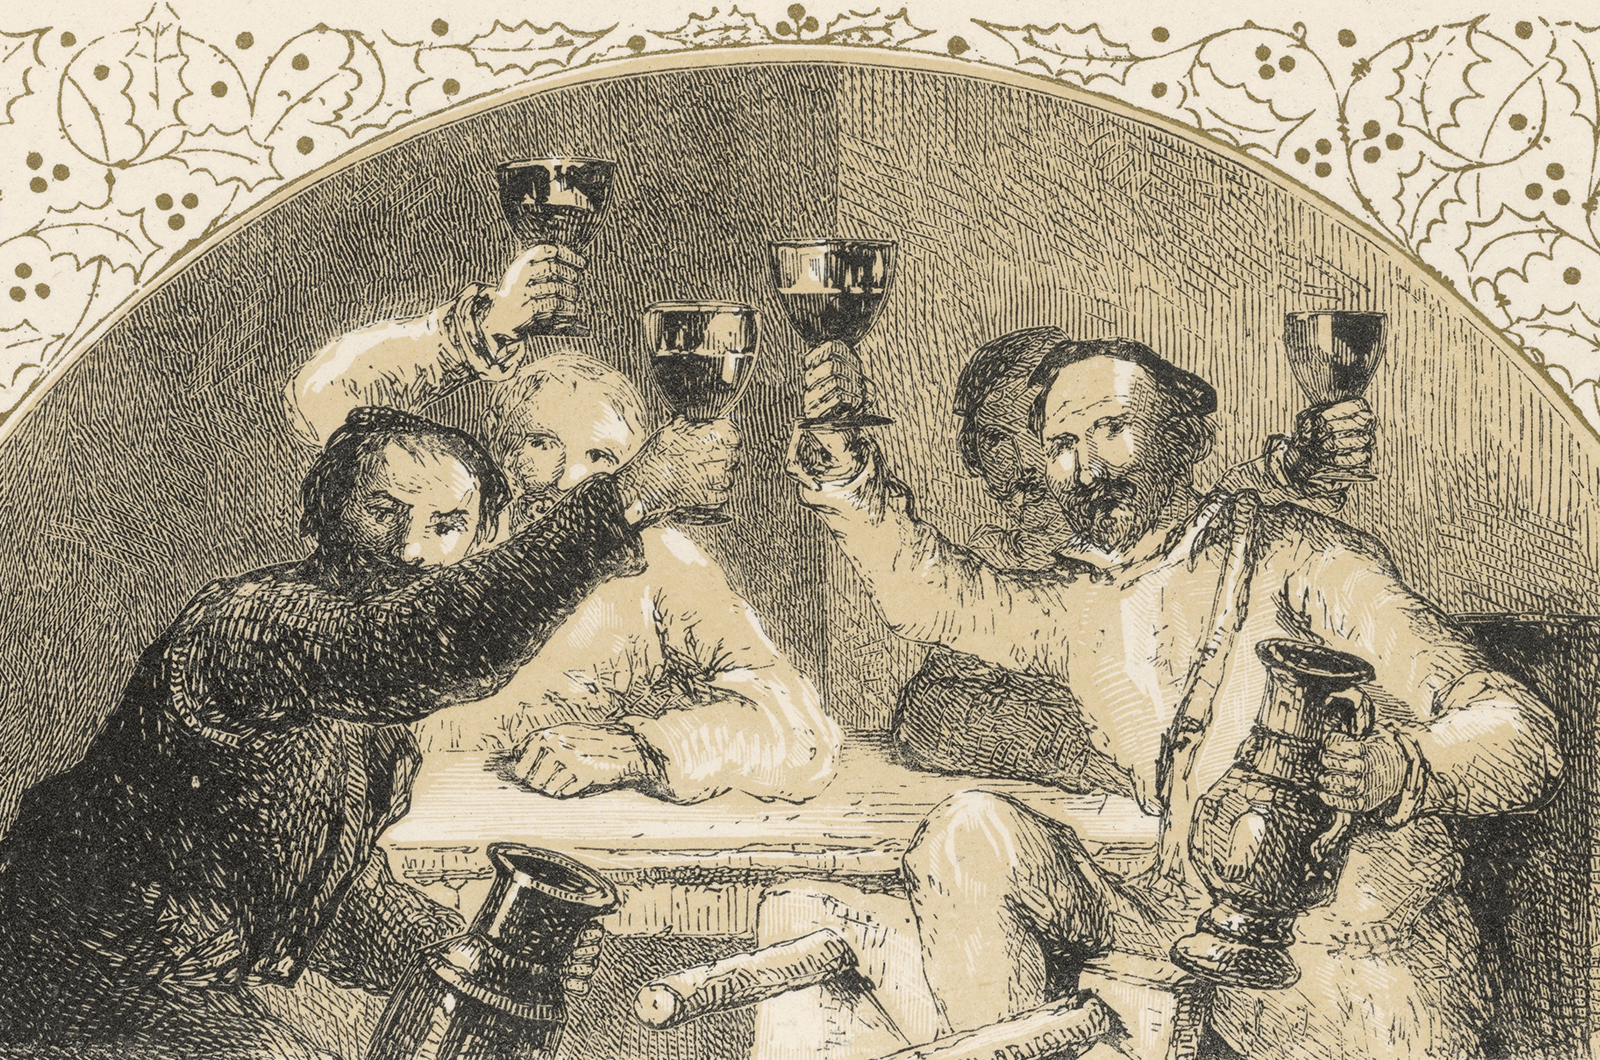 Men from 16th century toasting  